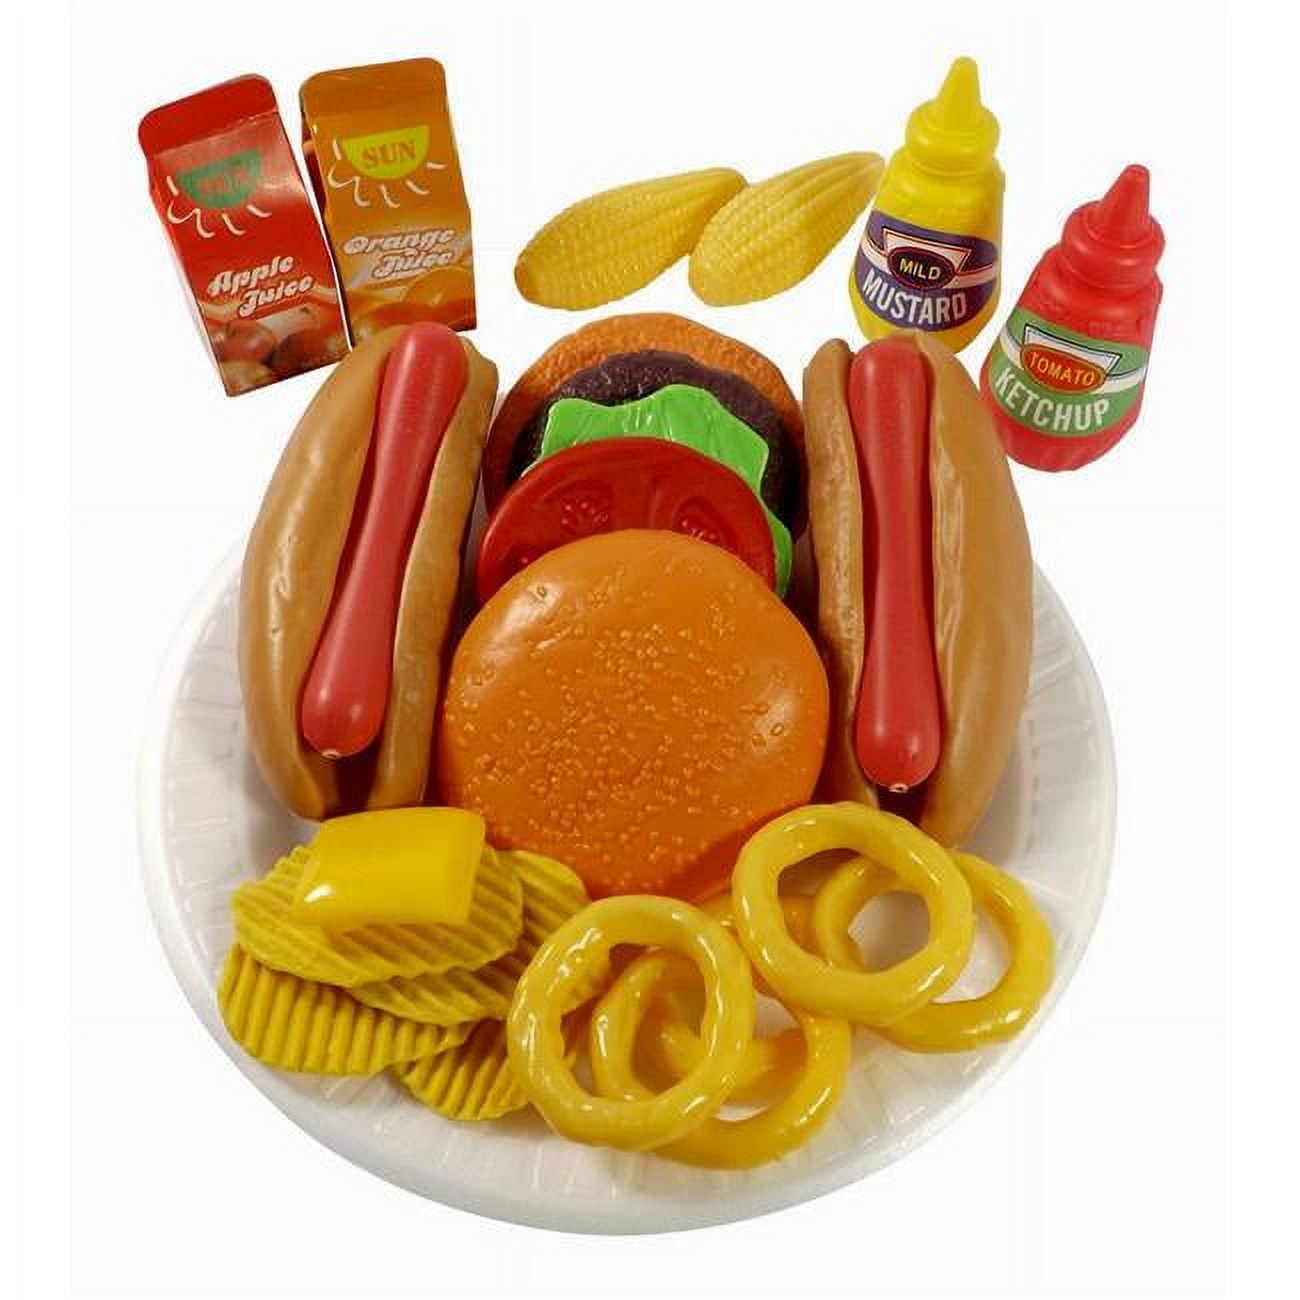 Ps8010 Fast Food Play Set For Kids, Includes Burger, Hot Dog, Potato Chips, Onion Rings, Corn & More Accessories